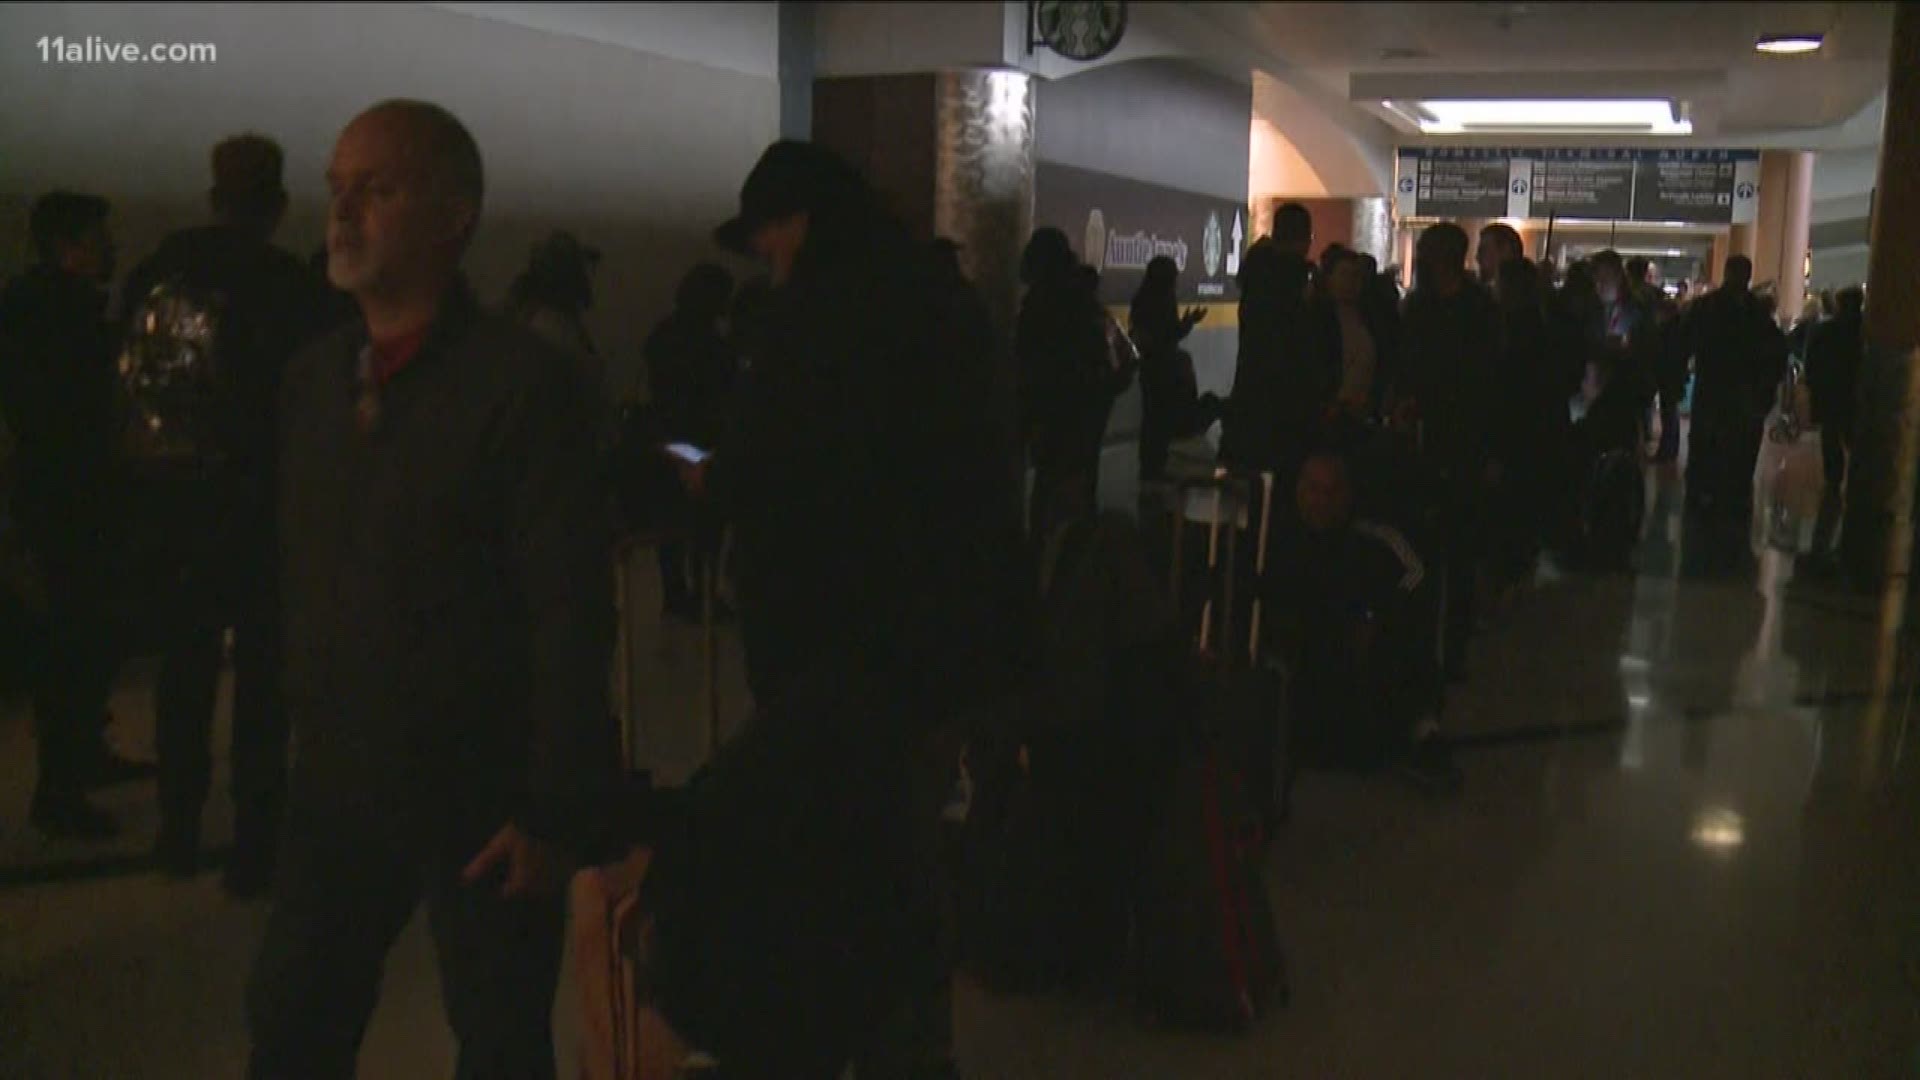 Airport officials say they sort of have a plan in place, but it's going to take time.